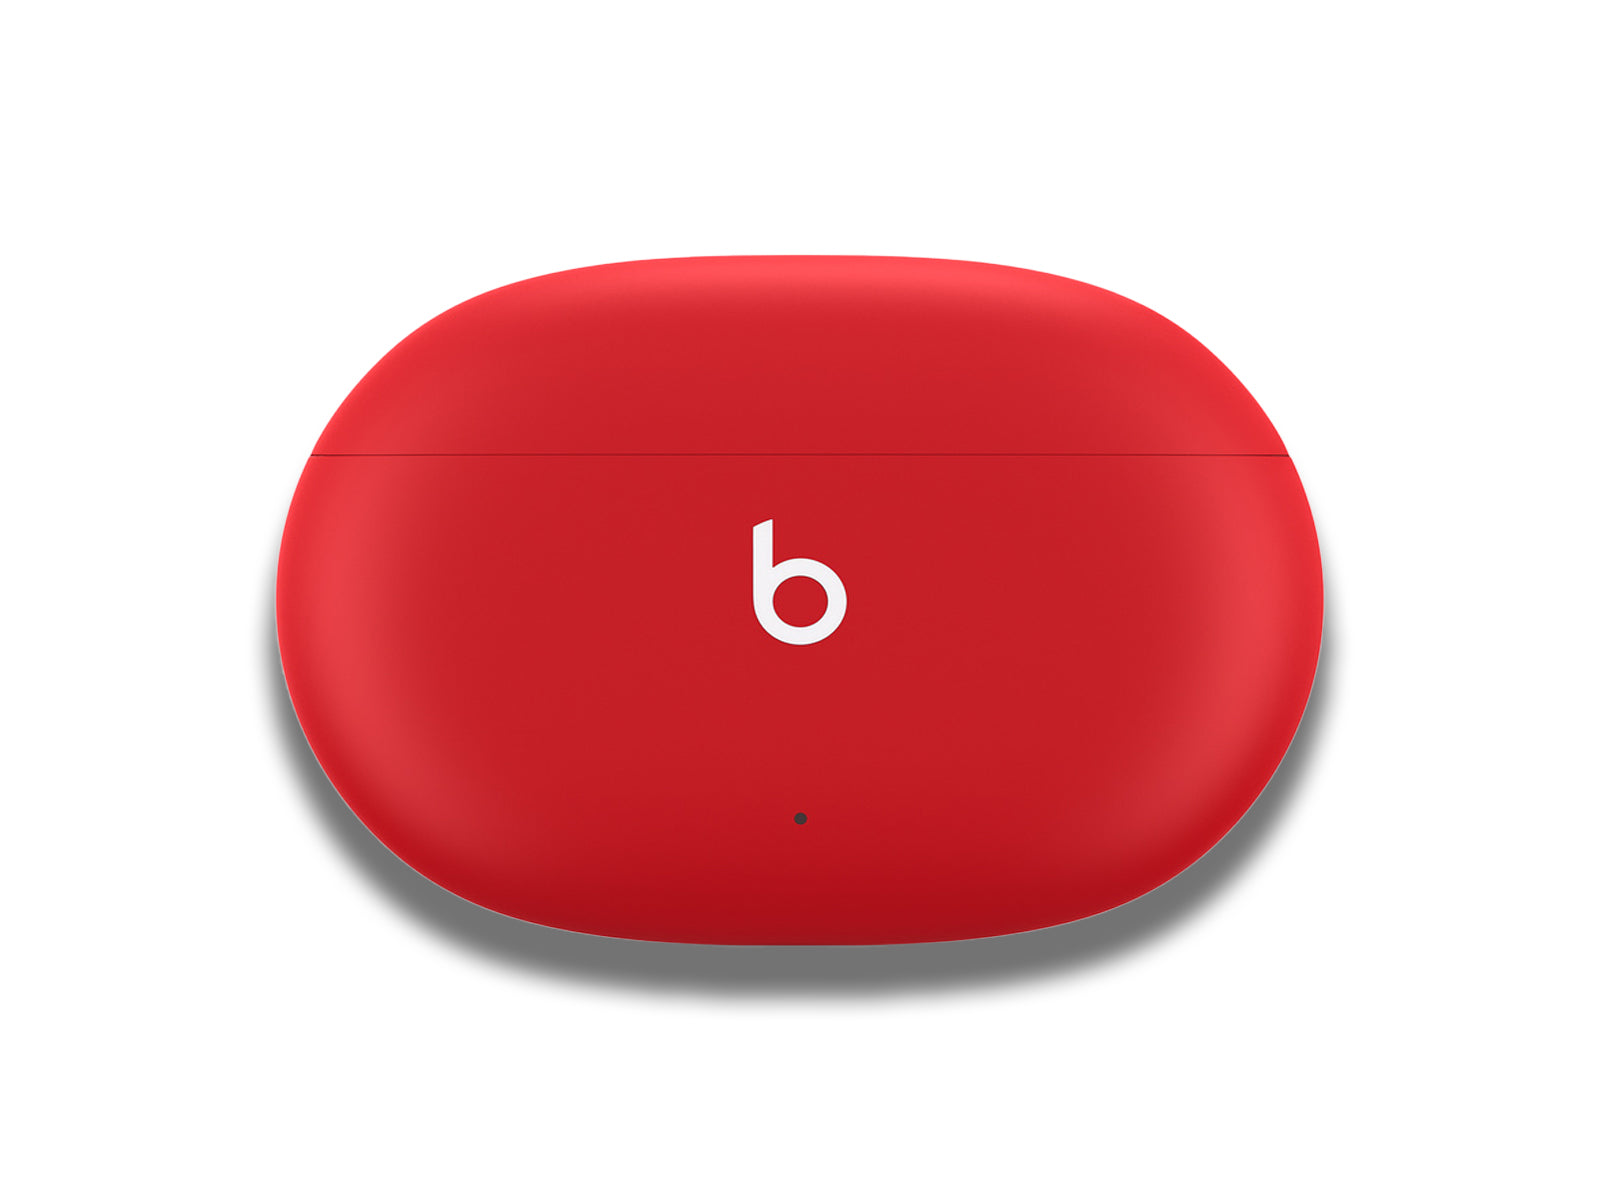 Top-view-image-of-the-red-charging-case-on-the-white-background